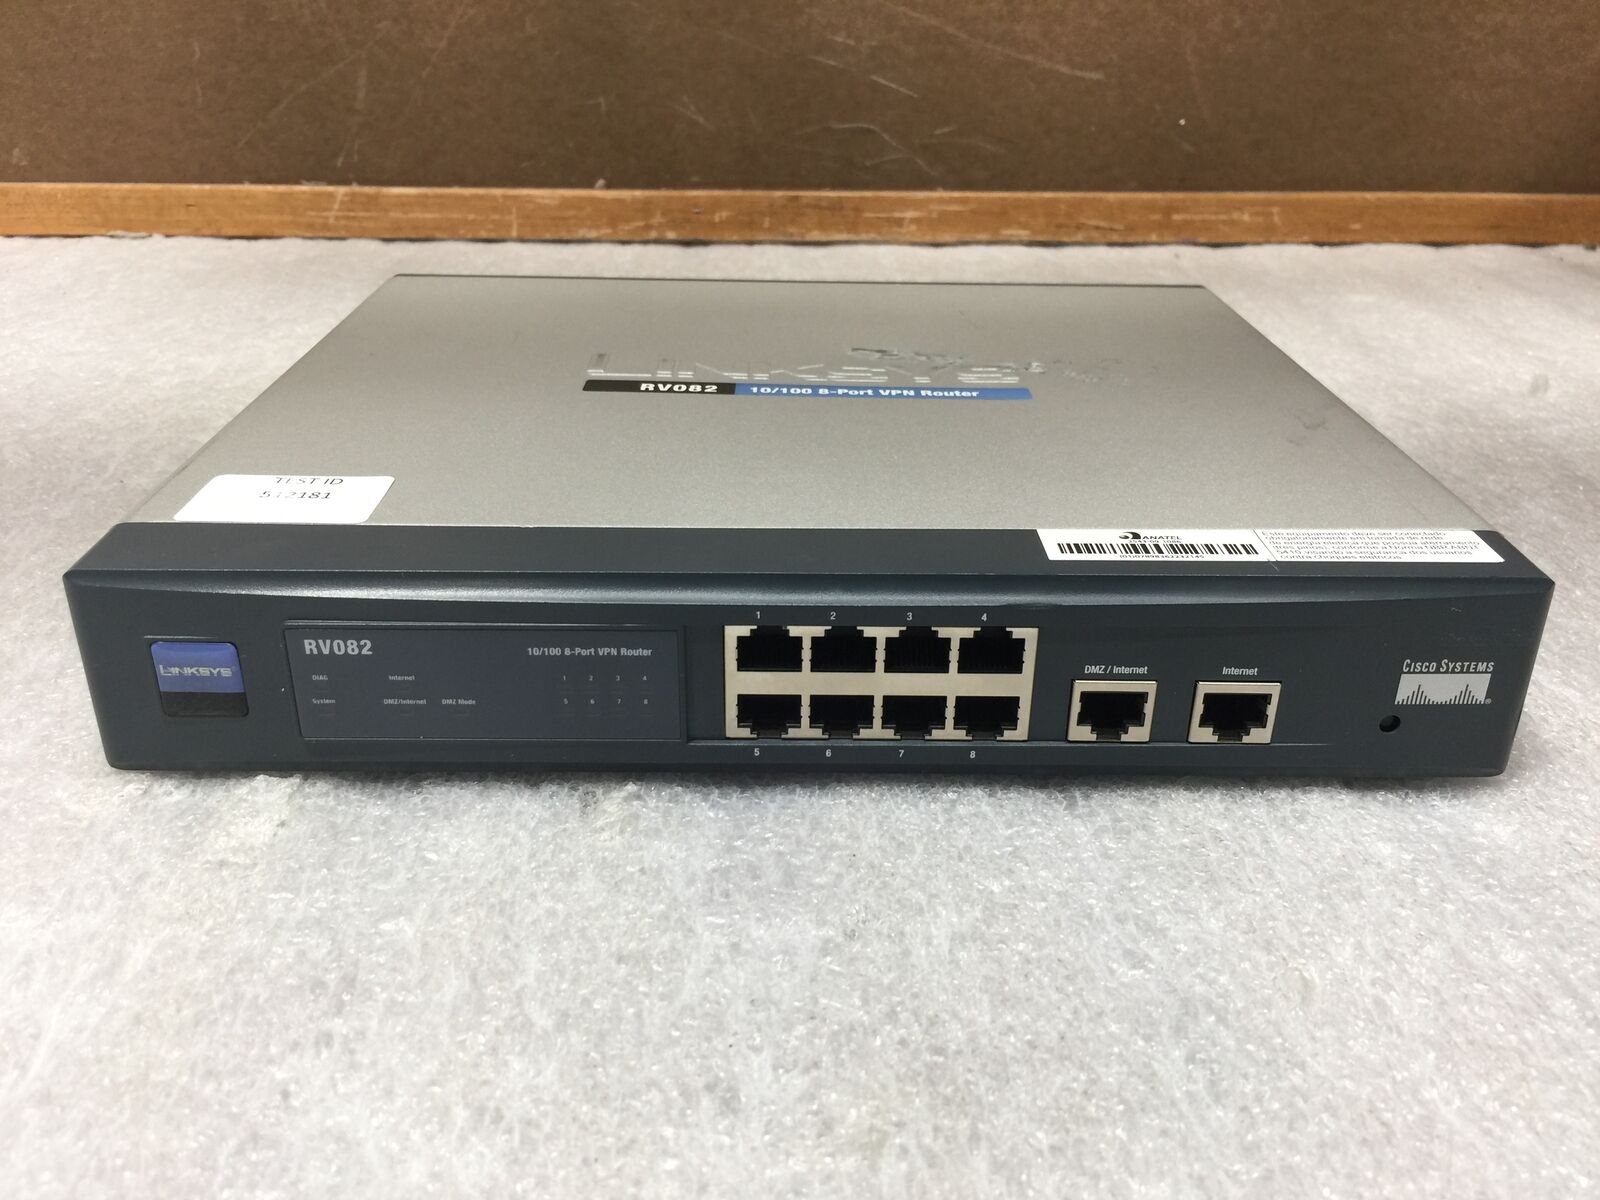 Cisco RV082 Dual WAN VPN Firewall / Router for Small Business, Factory Reset